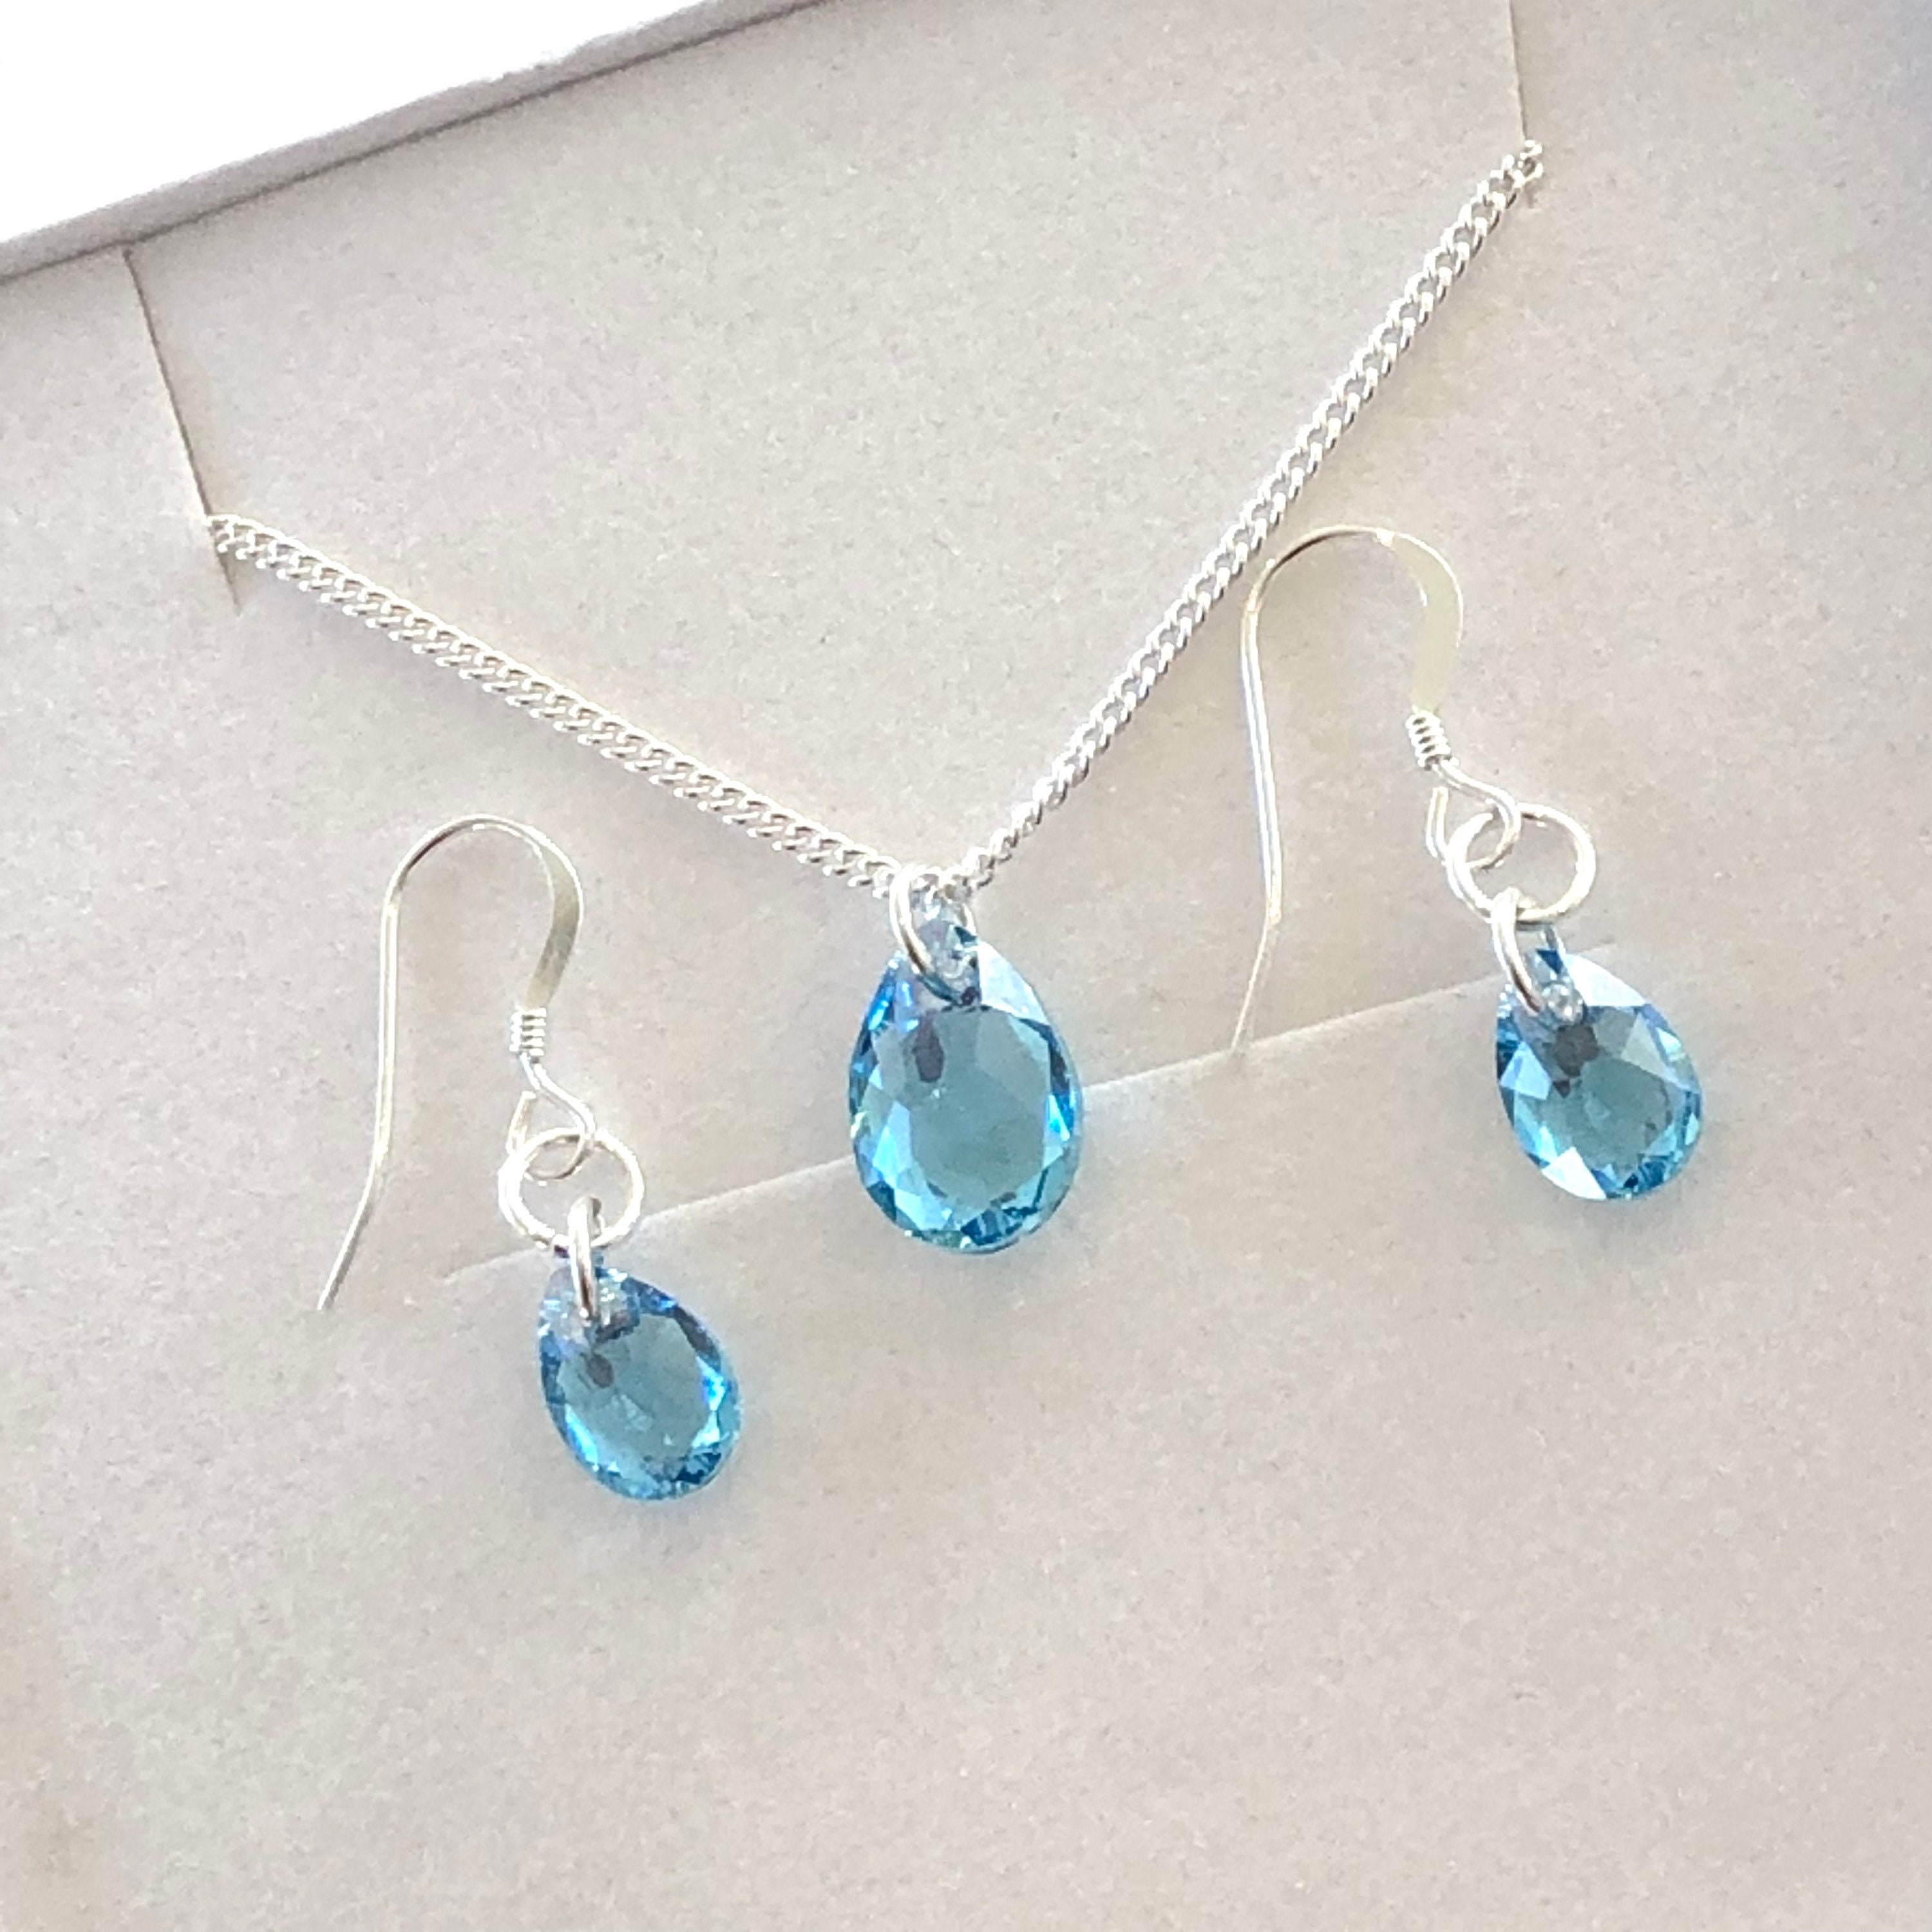 Raw Larimar Necklace and Drop Earrings Set - Uniquelan Jewelry